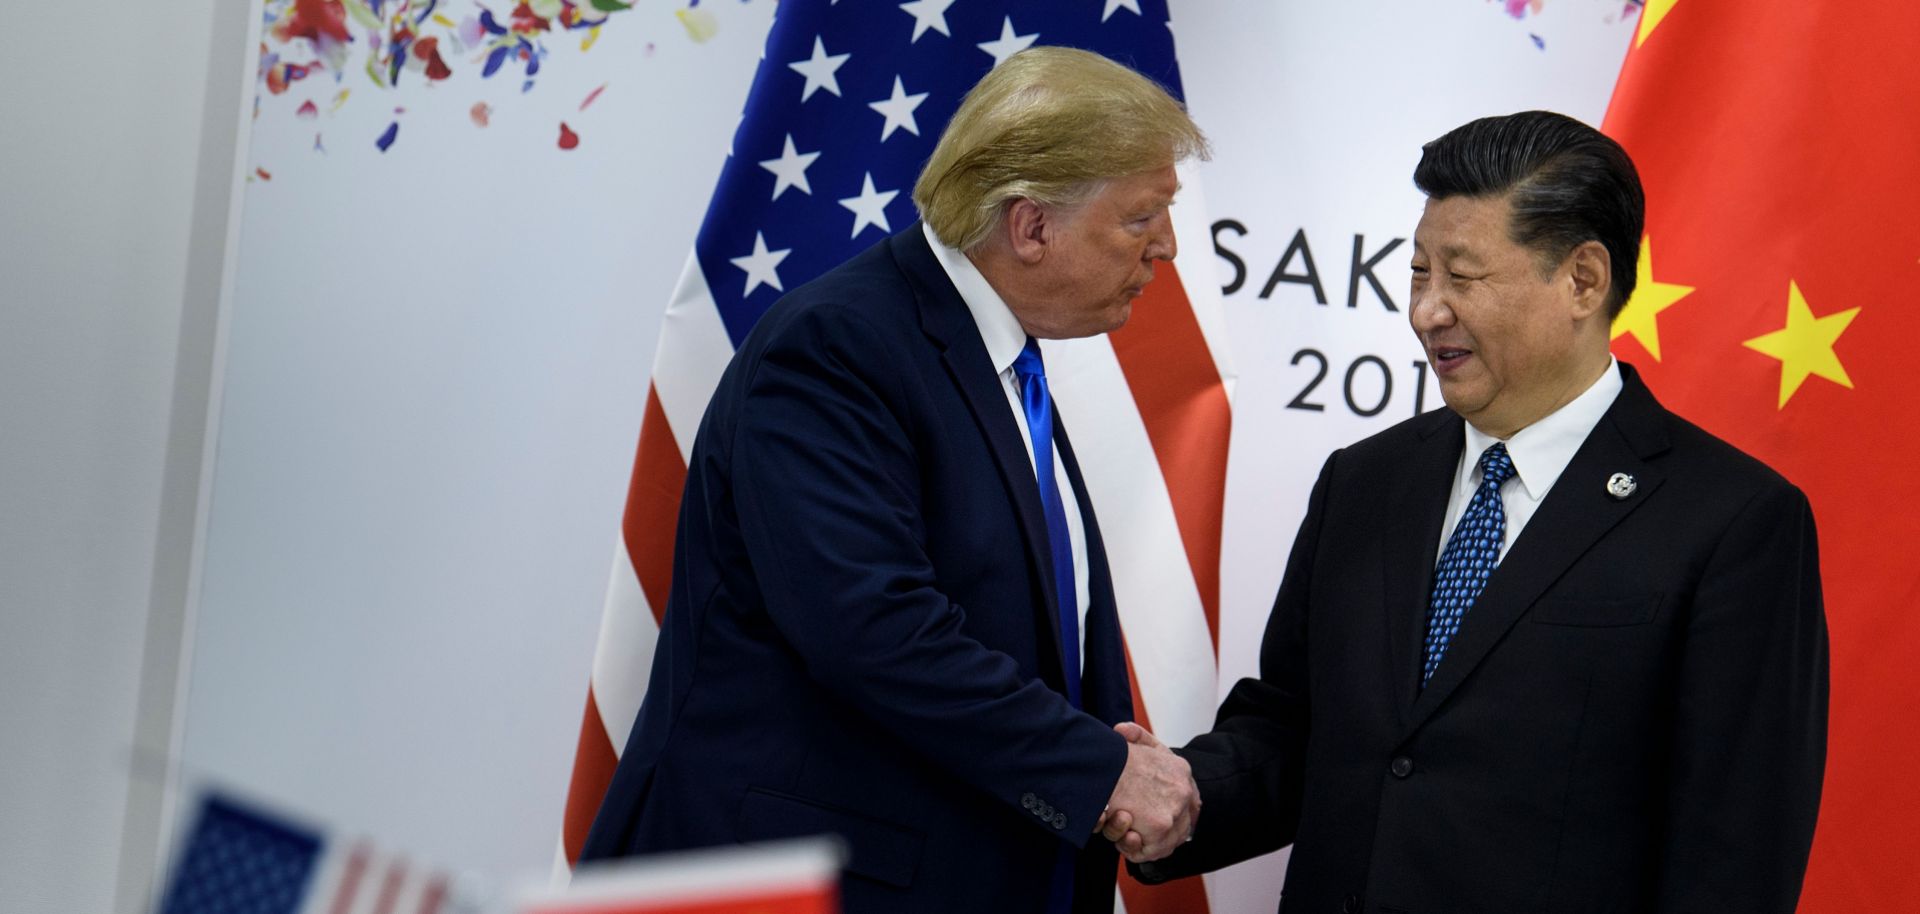 U.S. President Donald Trump and Chinese President Xi Jinping meet during the G-20 summit in Osaka, Japan, on June 29, 2019.